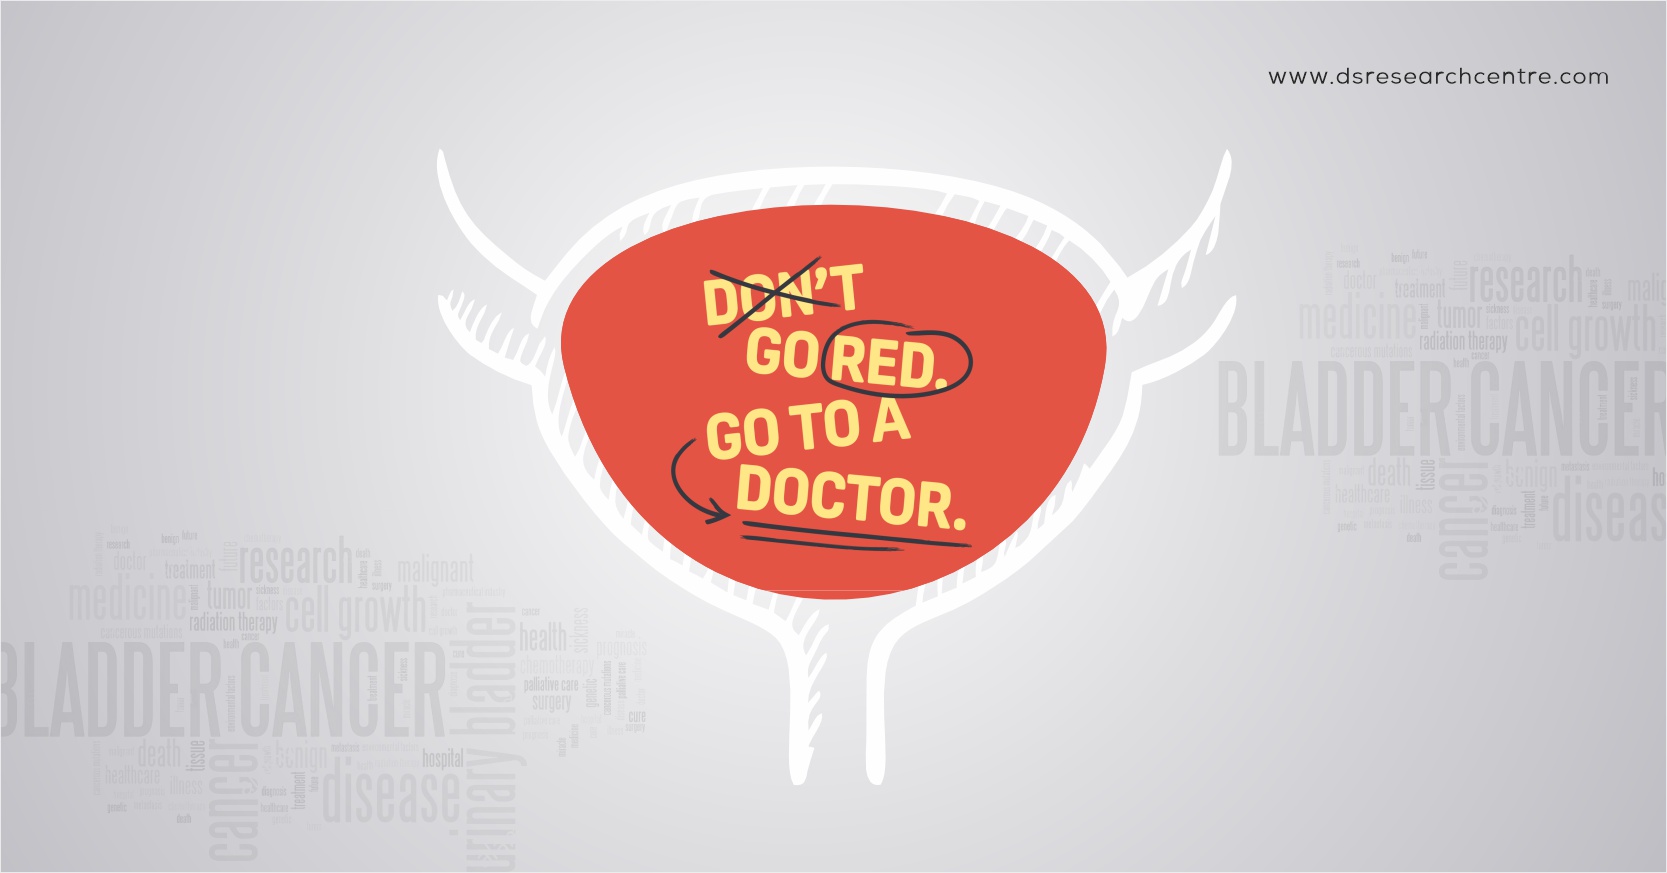 Bladder Cancer Don’t Go Red. Go To A Doctor